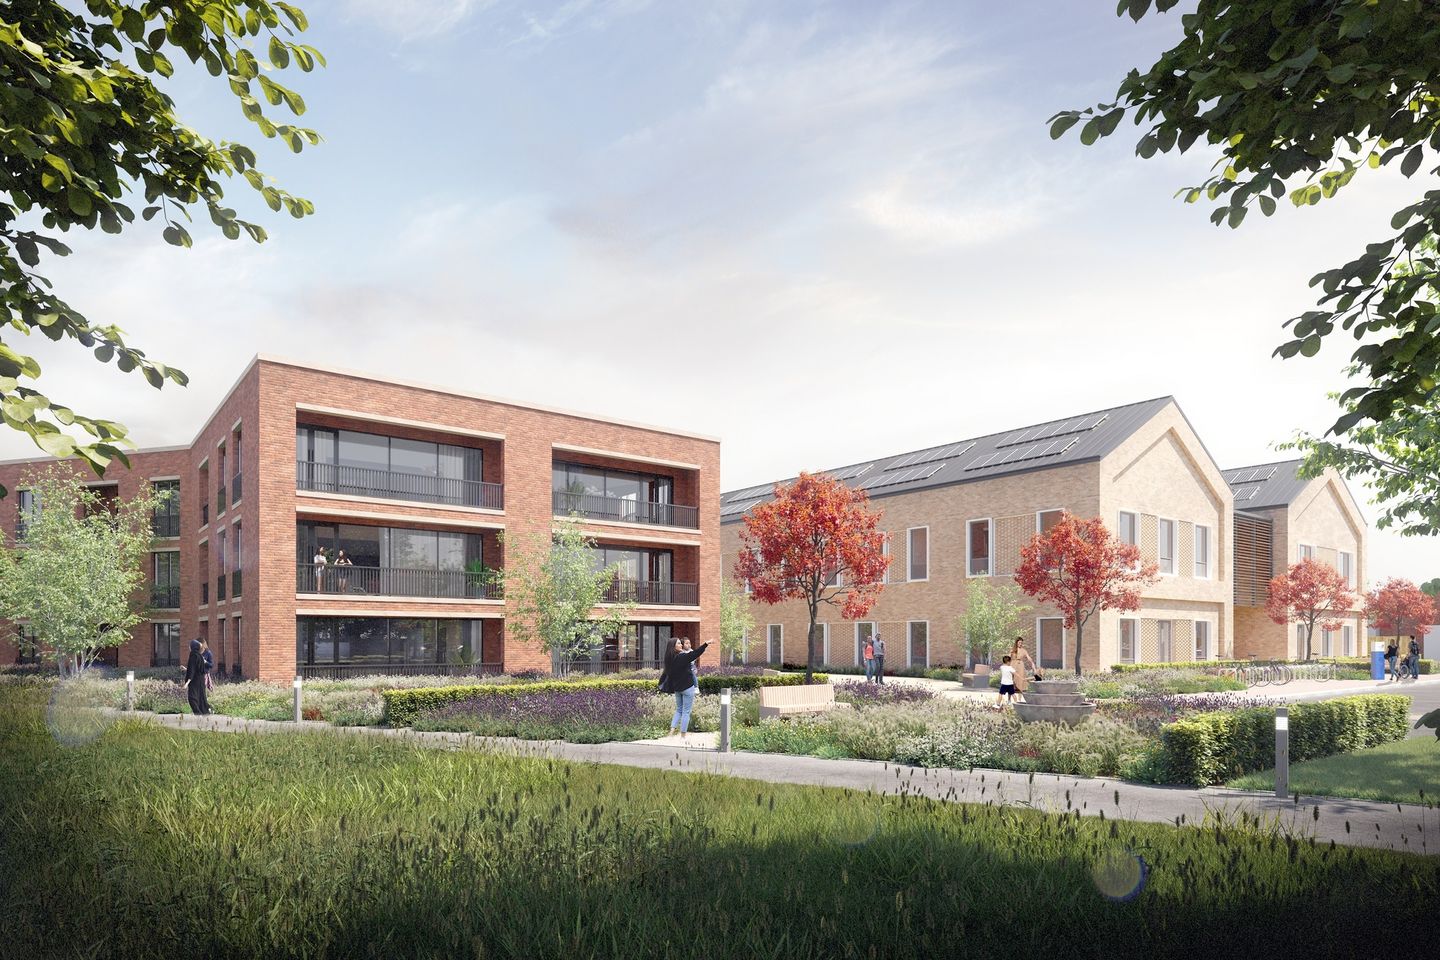 Image shows what new Oxley health and wellbeing facility and homes could look like